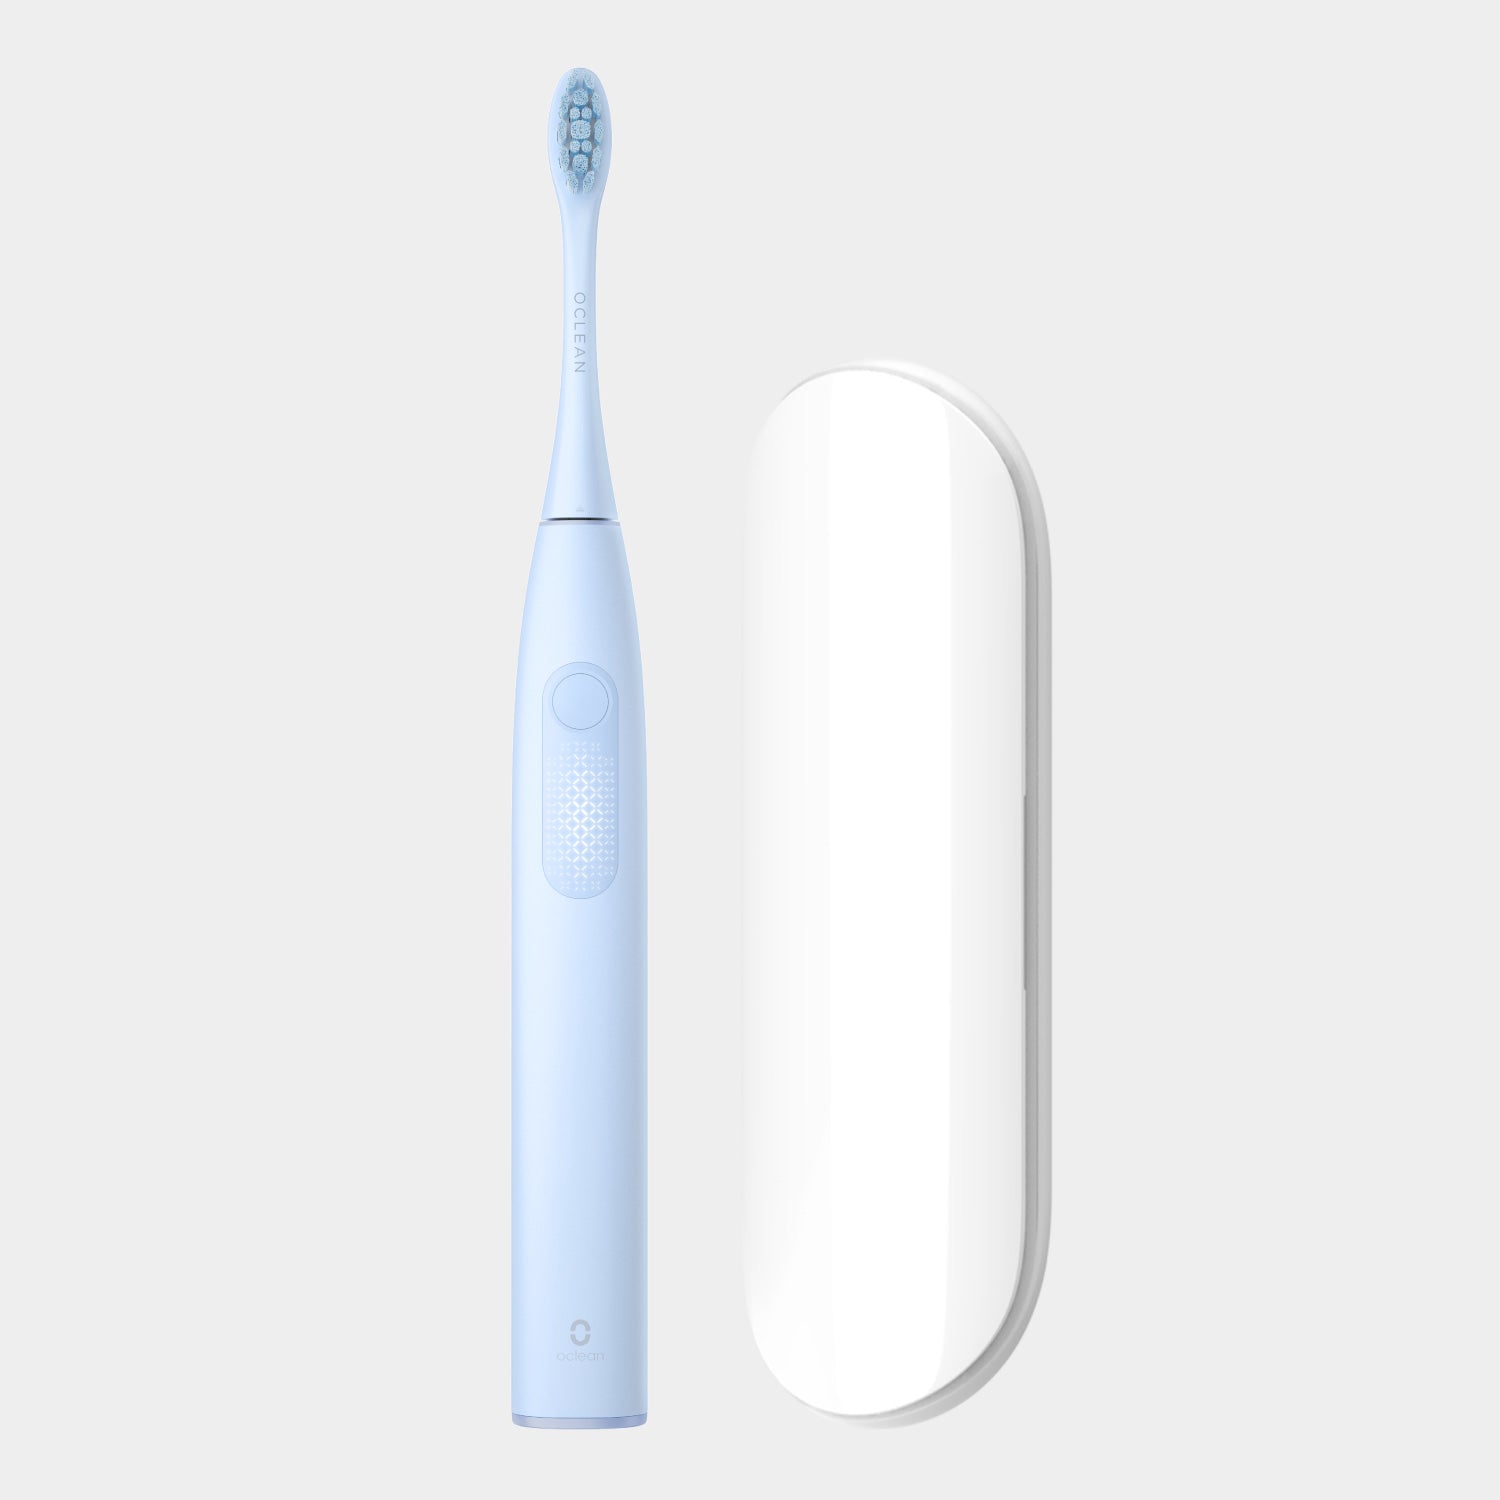 Oclean F1 Sonic Electric Toothbrush-Toothbrushes-Oclean US Store